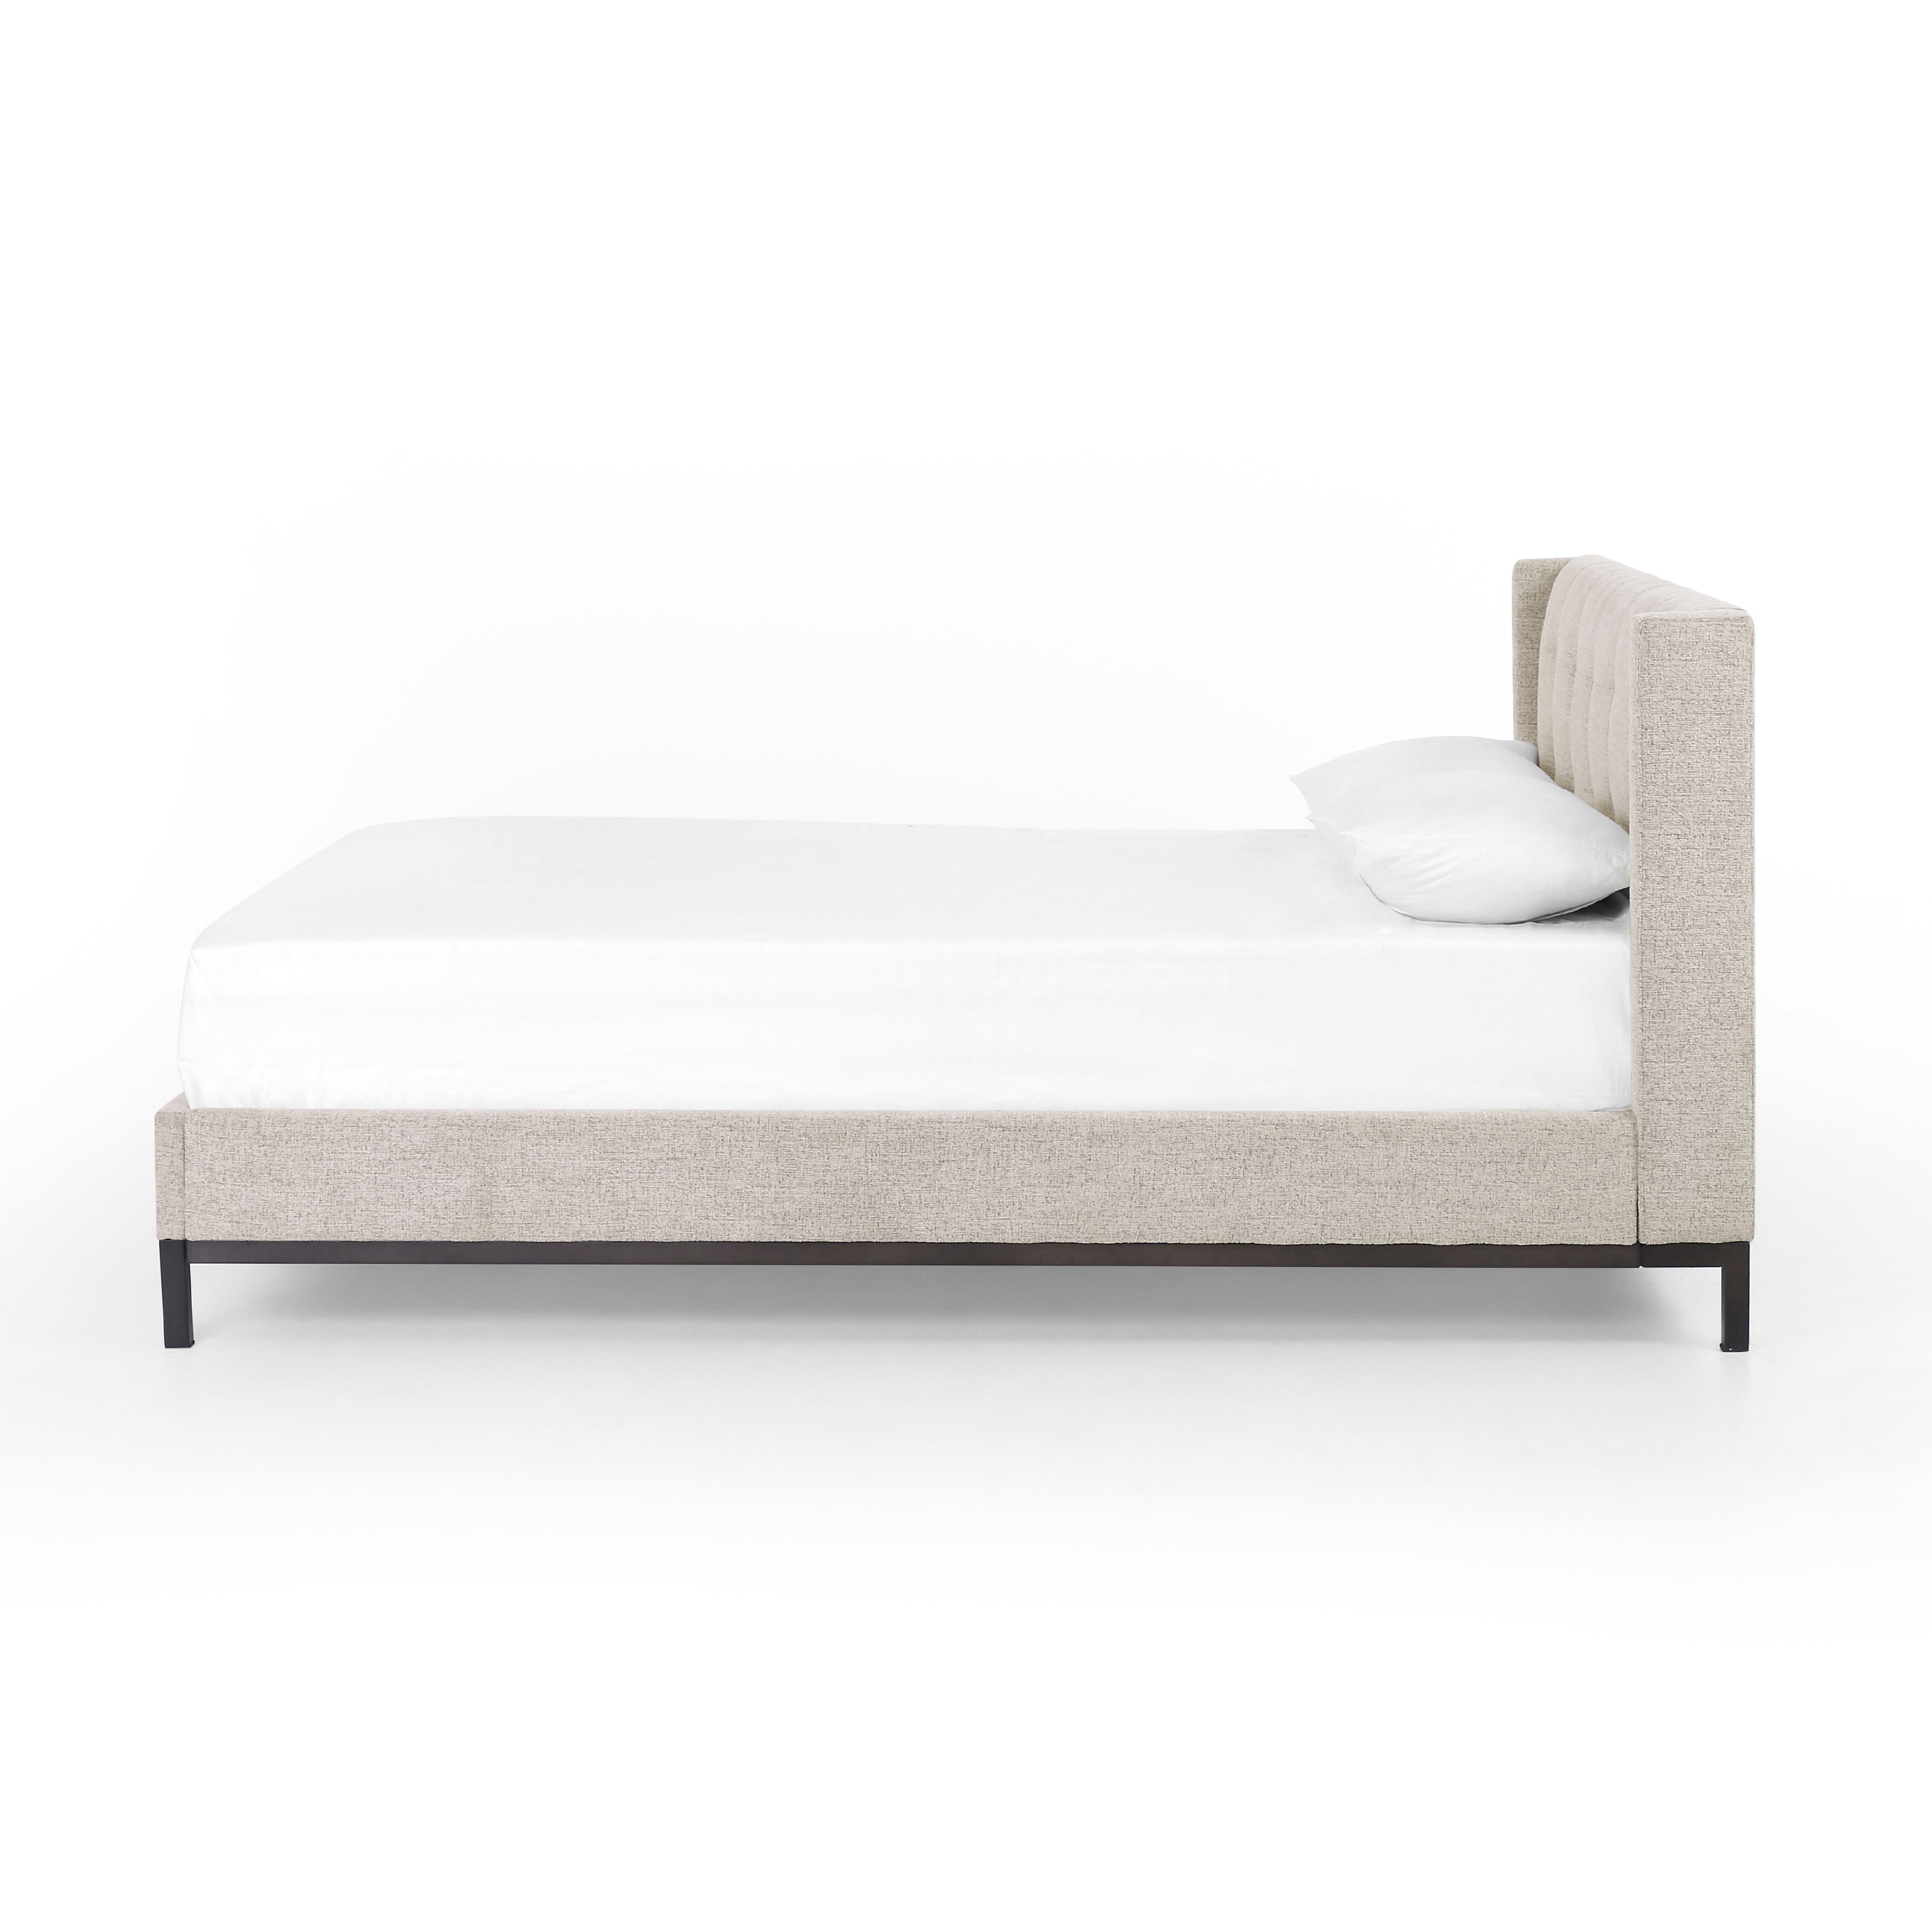 Newhall Bed-Plushtone Linen-Queen - Image 3